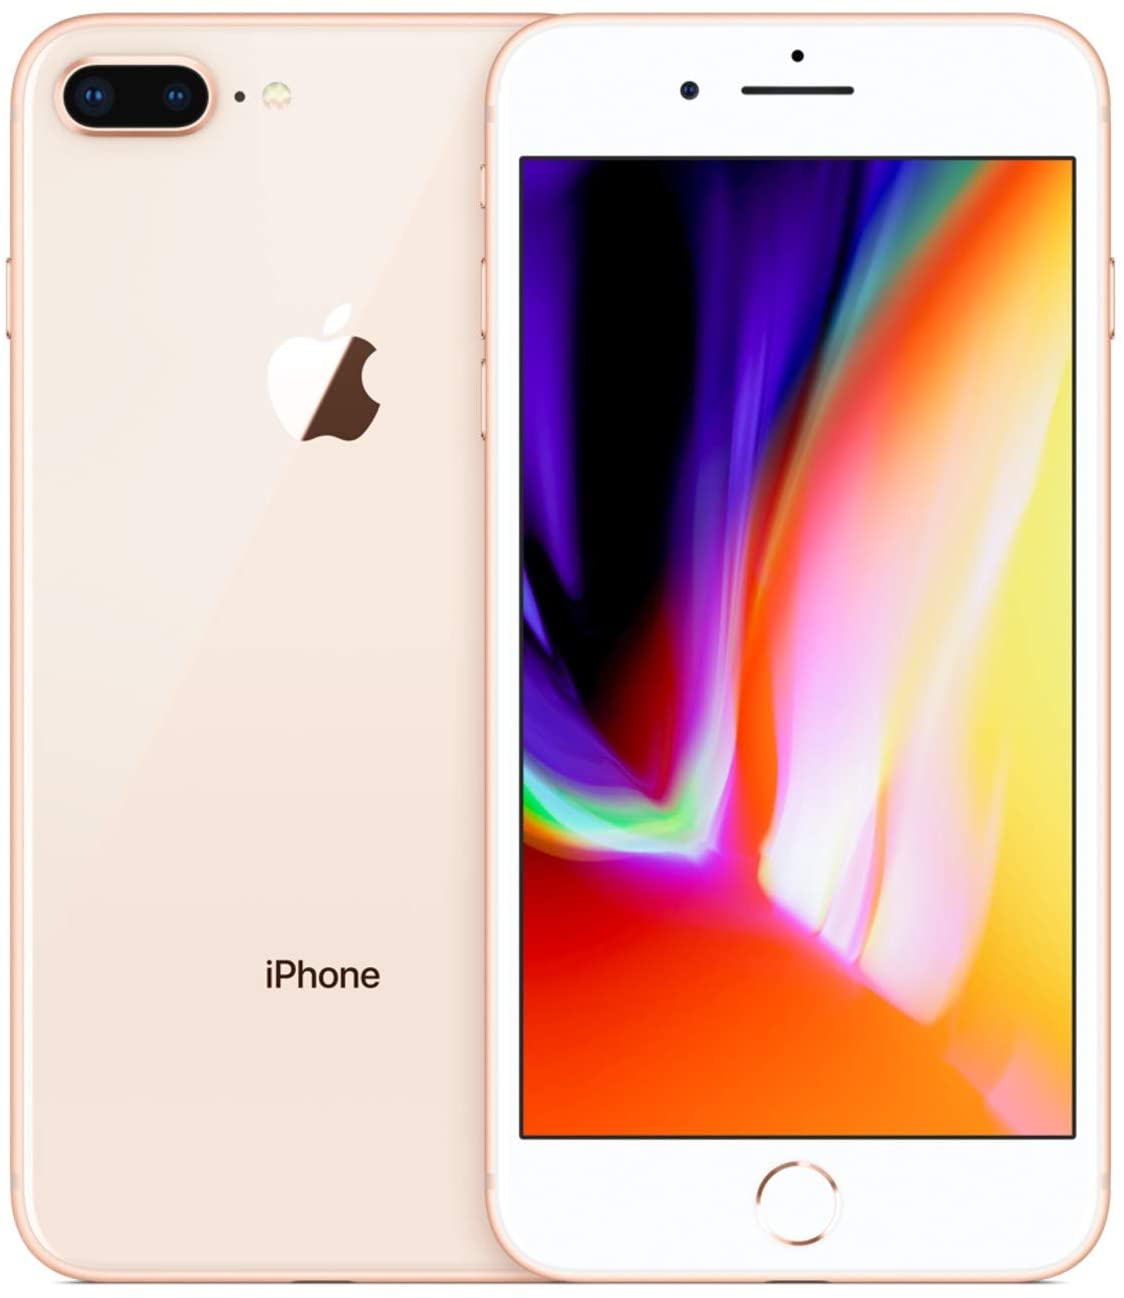 APPLE iPhone 8 Plus 64GB A1897 UNLOCKED SMARTPHONE-BLK  Refurbished with Charger - Atlas Computers & Electronics 